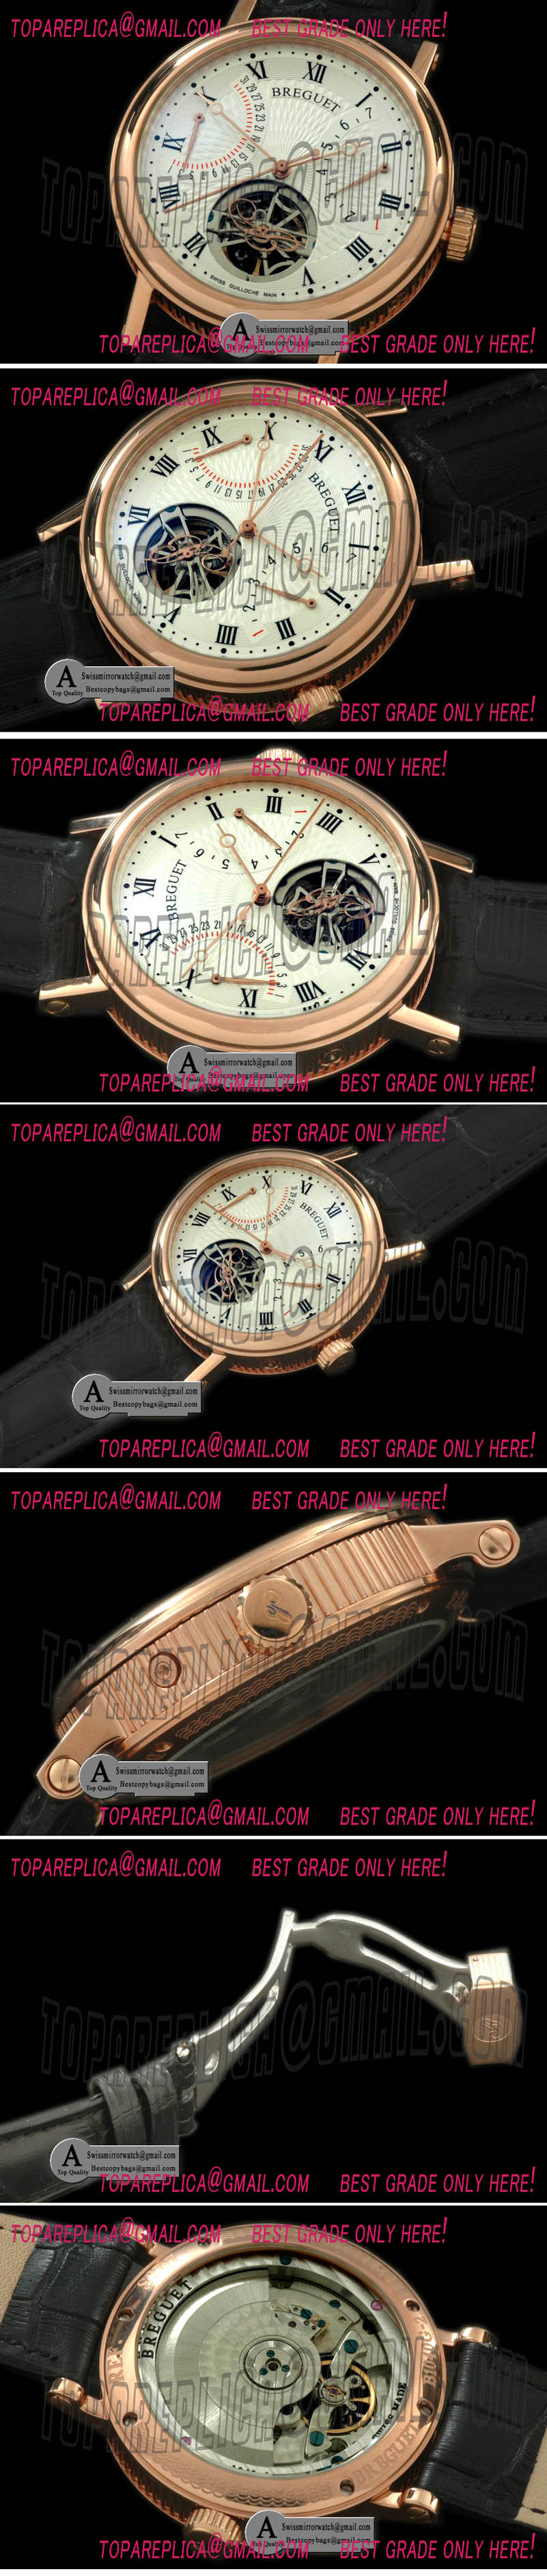 Breguet Retrogating Day Date Tourbillon Rose Gold Leather White Asian 2813 Replica Watches